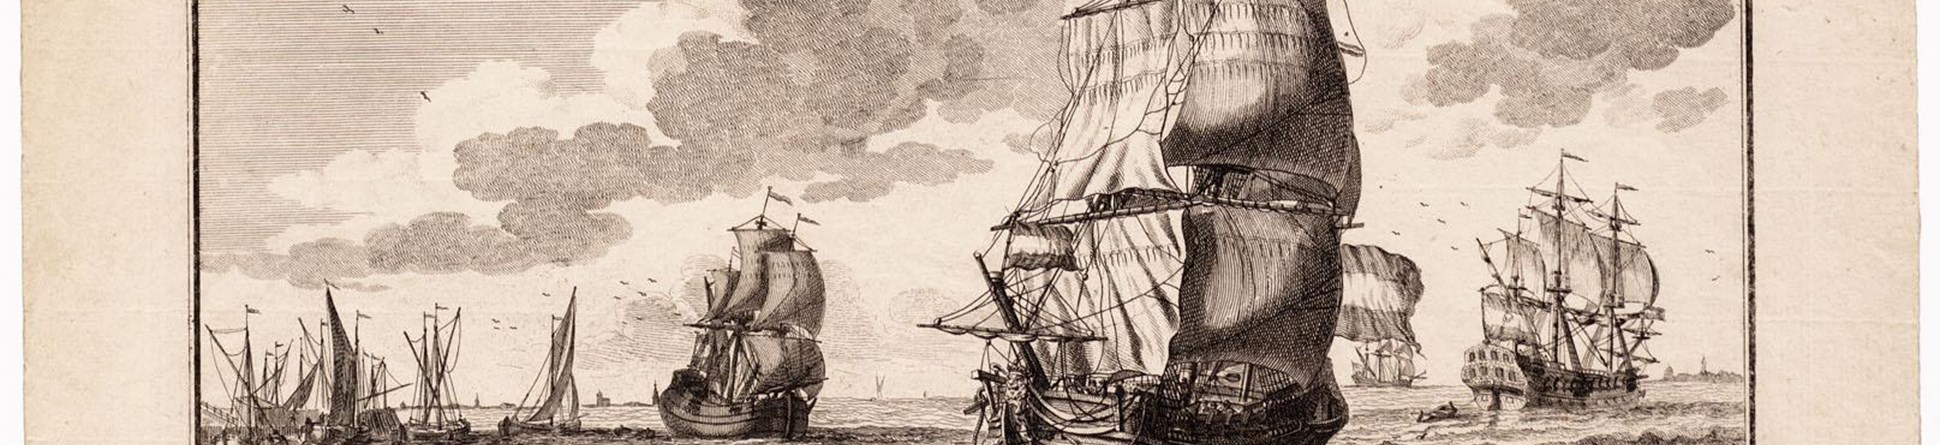 A drawing of a ship similar to the Rooswijk – a Dutch ‘hekboot’, by Adolf van der Laan in 1716.